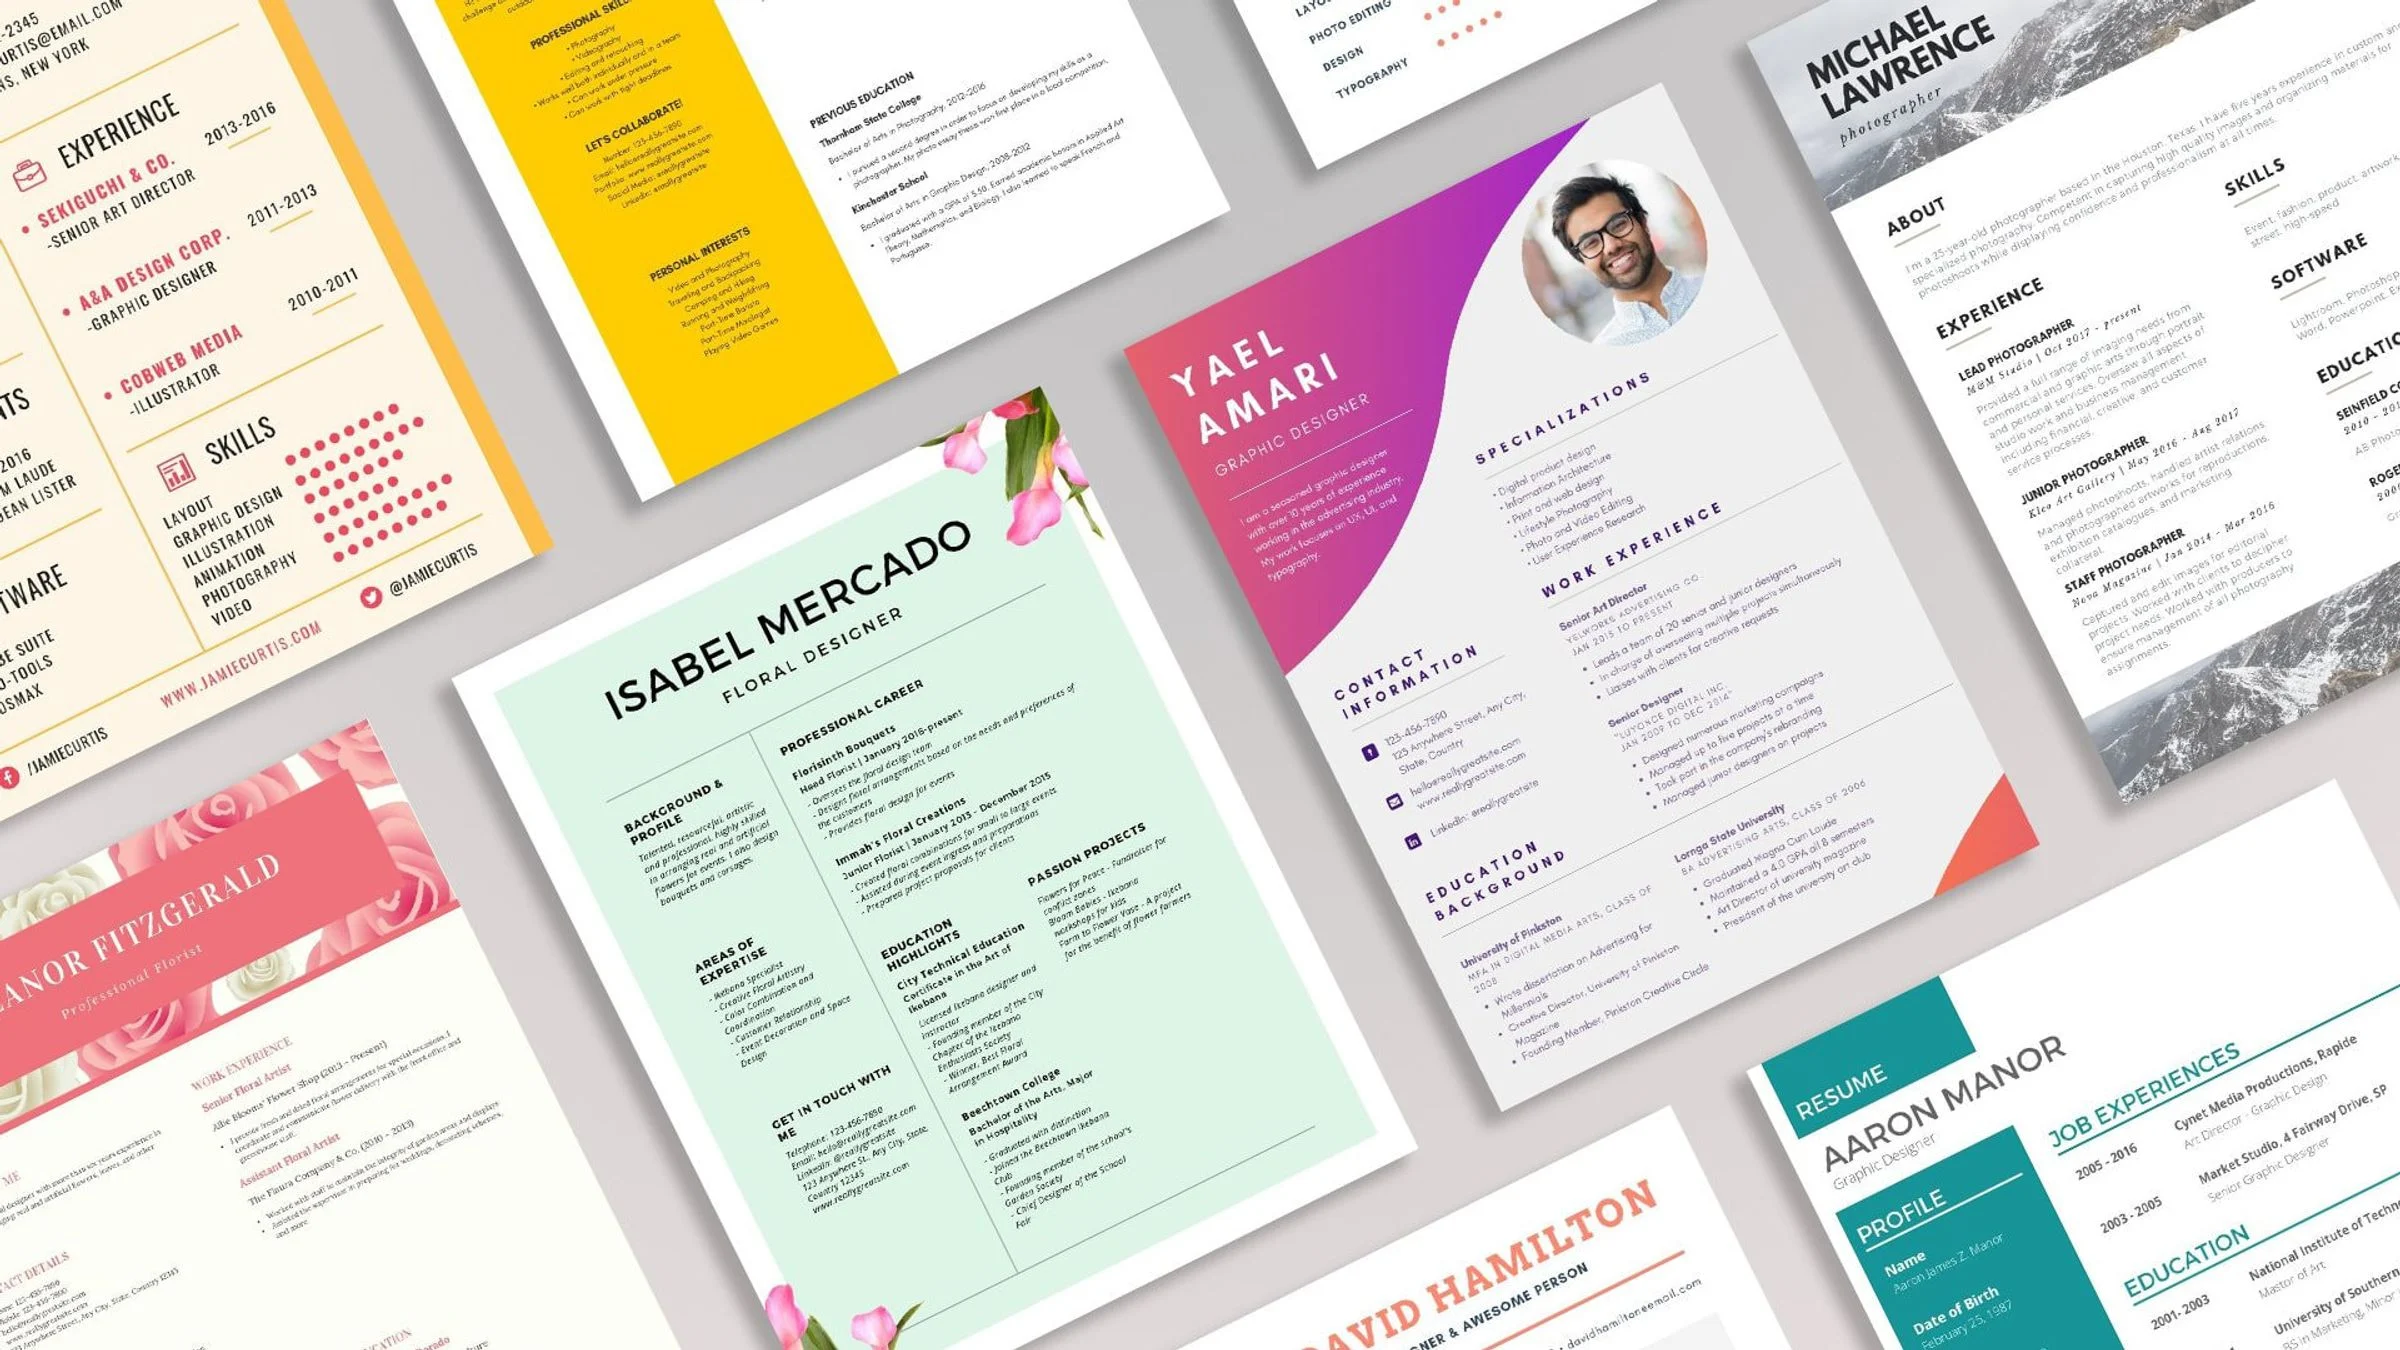 Tips for creating a visually appealing resume for Indian recruiters